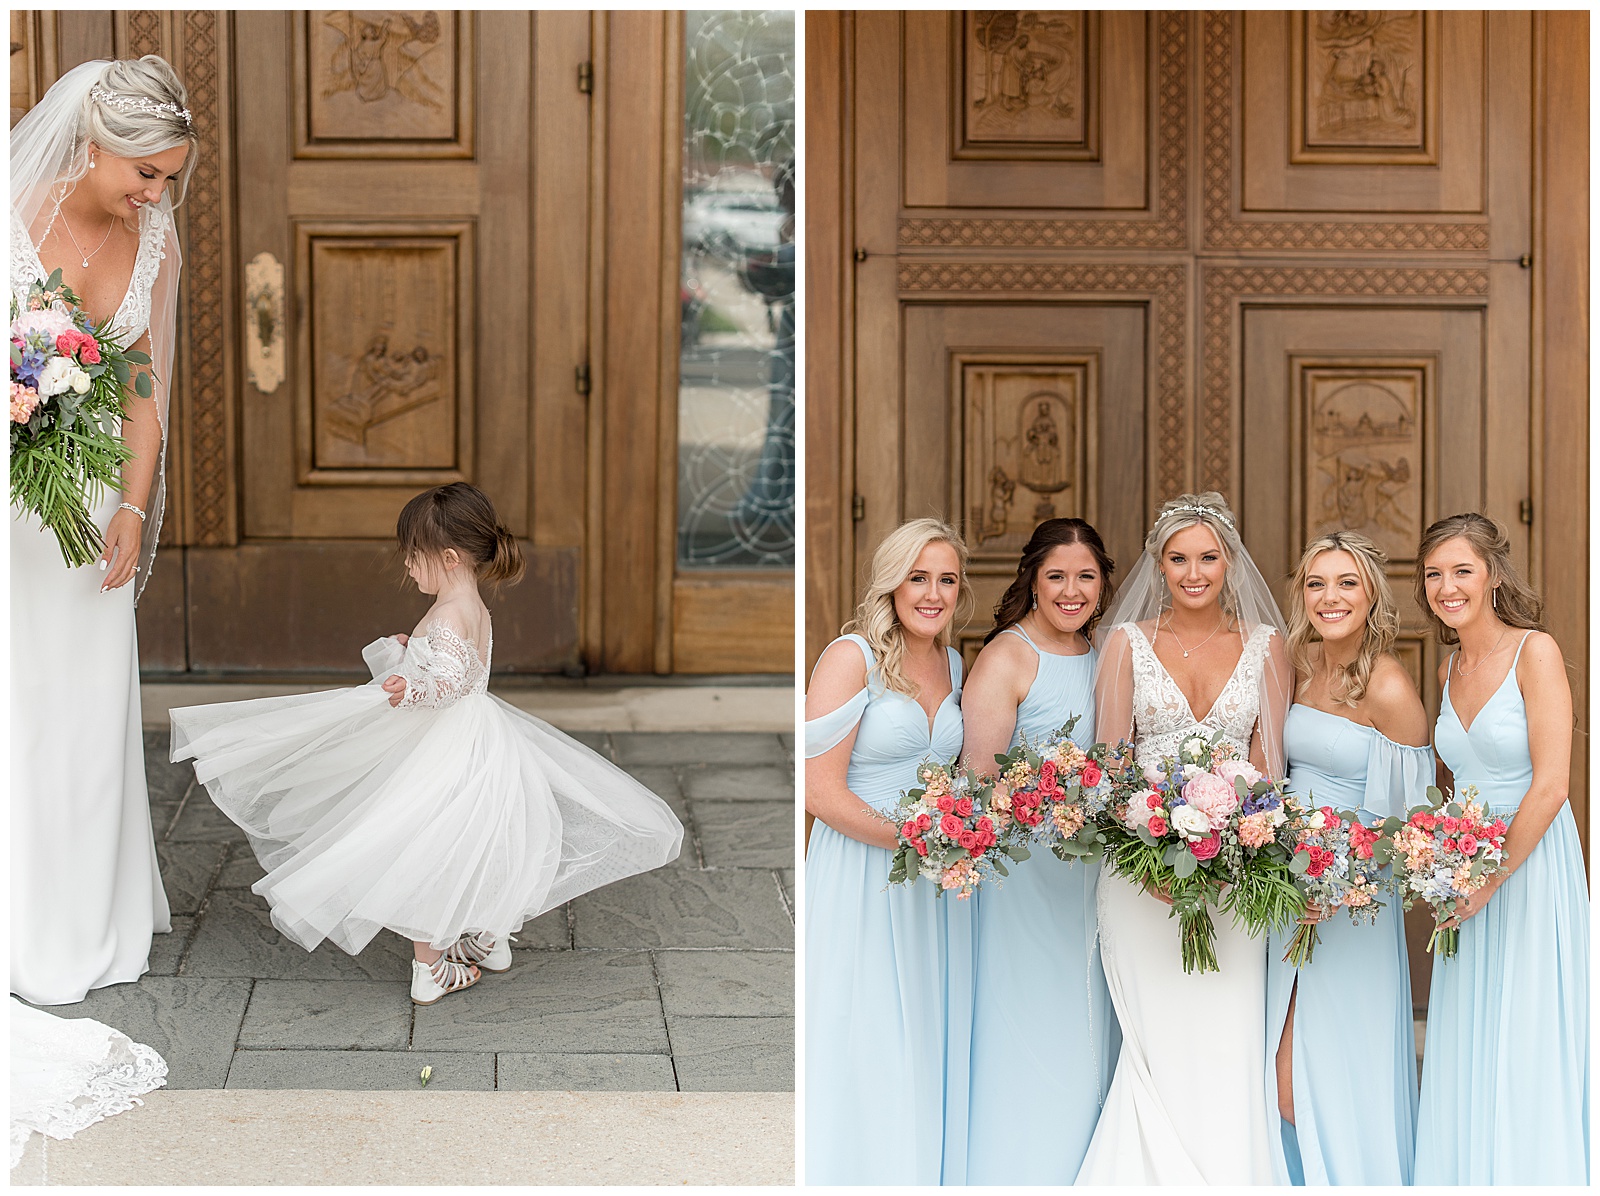 bride with bridesmaids and flower girl outside large wooden doors of catholic church